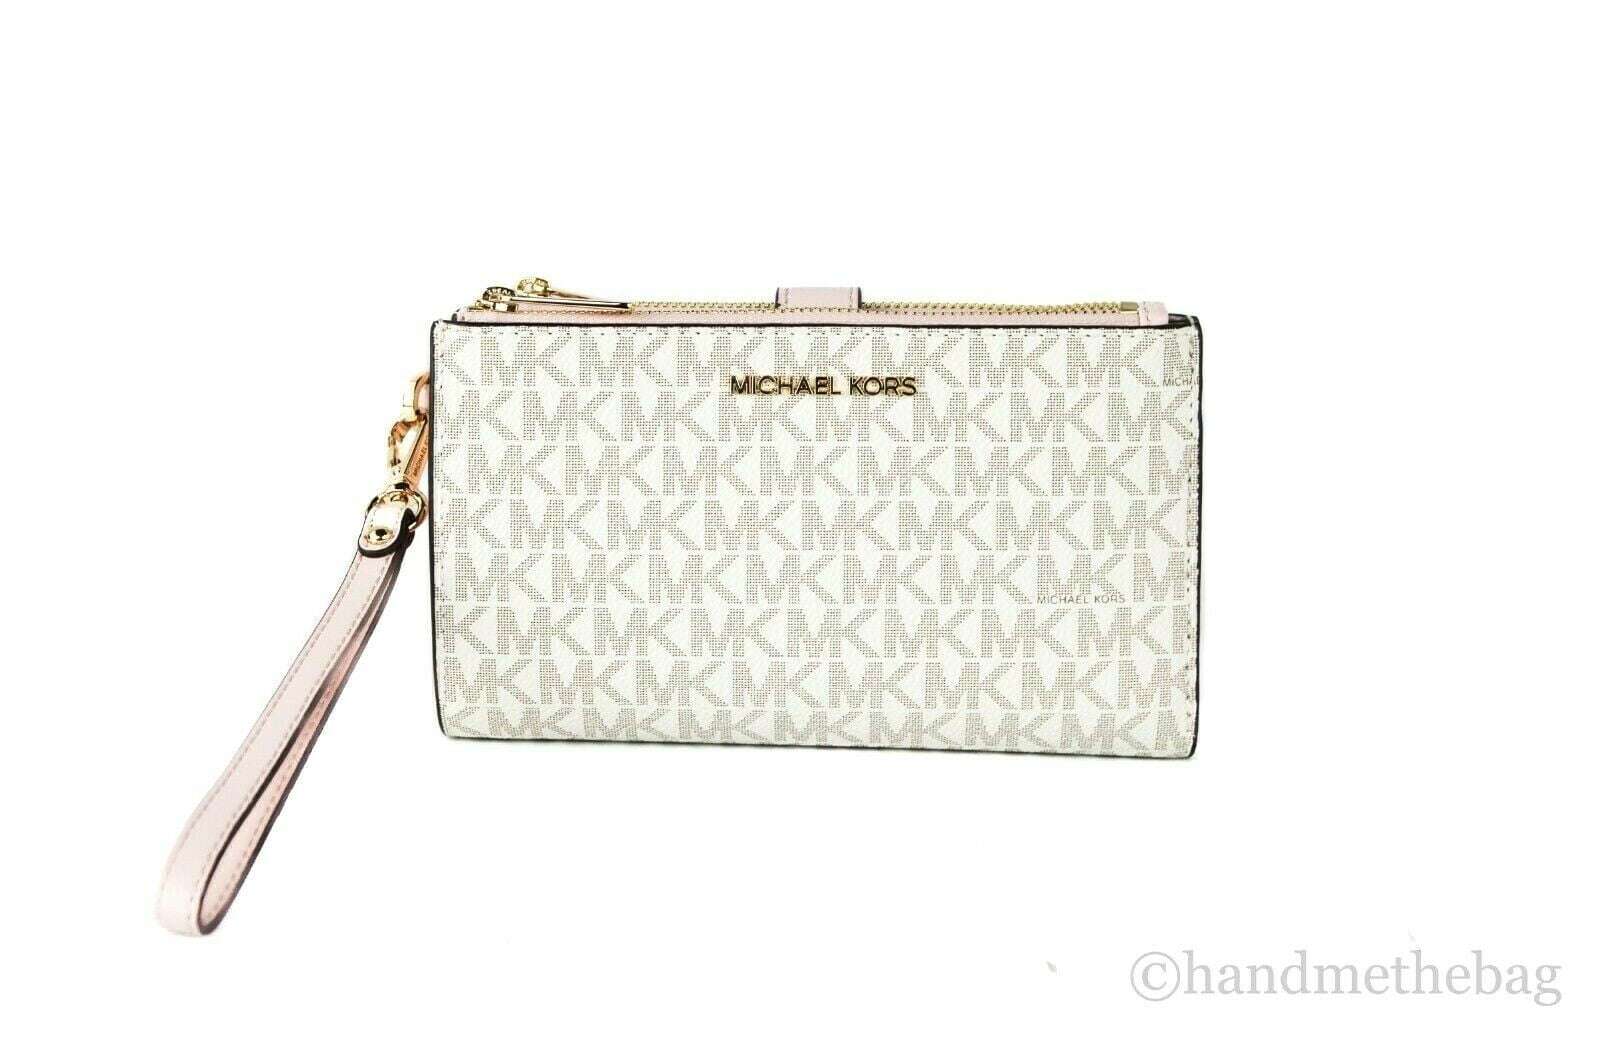 Micheal Kors Wallet Clutch for Apple IPhone  Micheal kors wallet, Michael  kors accessories, Clutch wallet